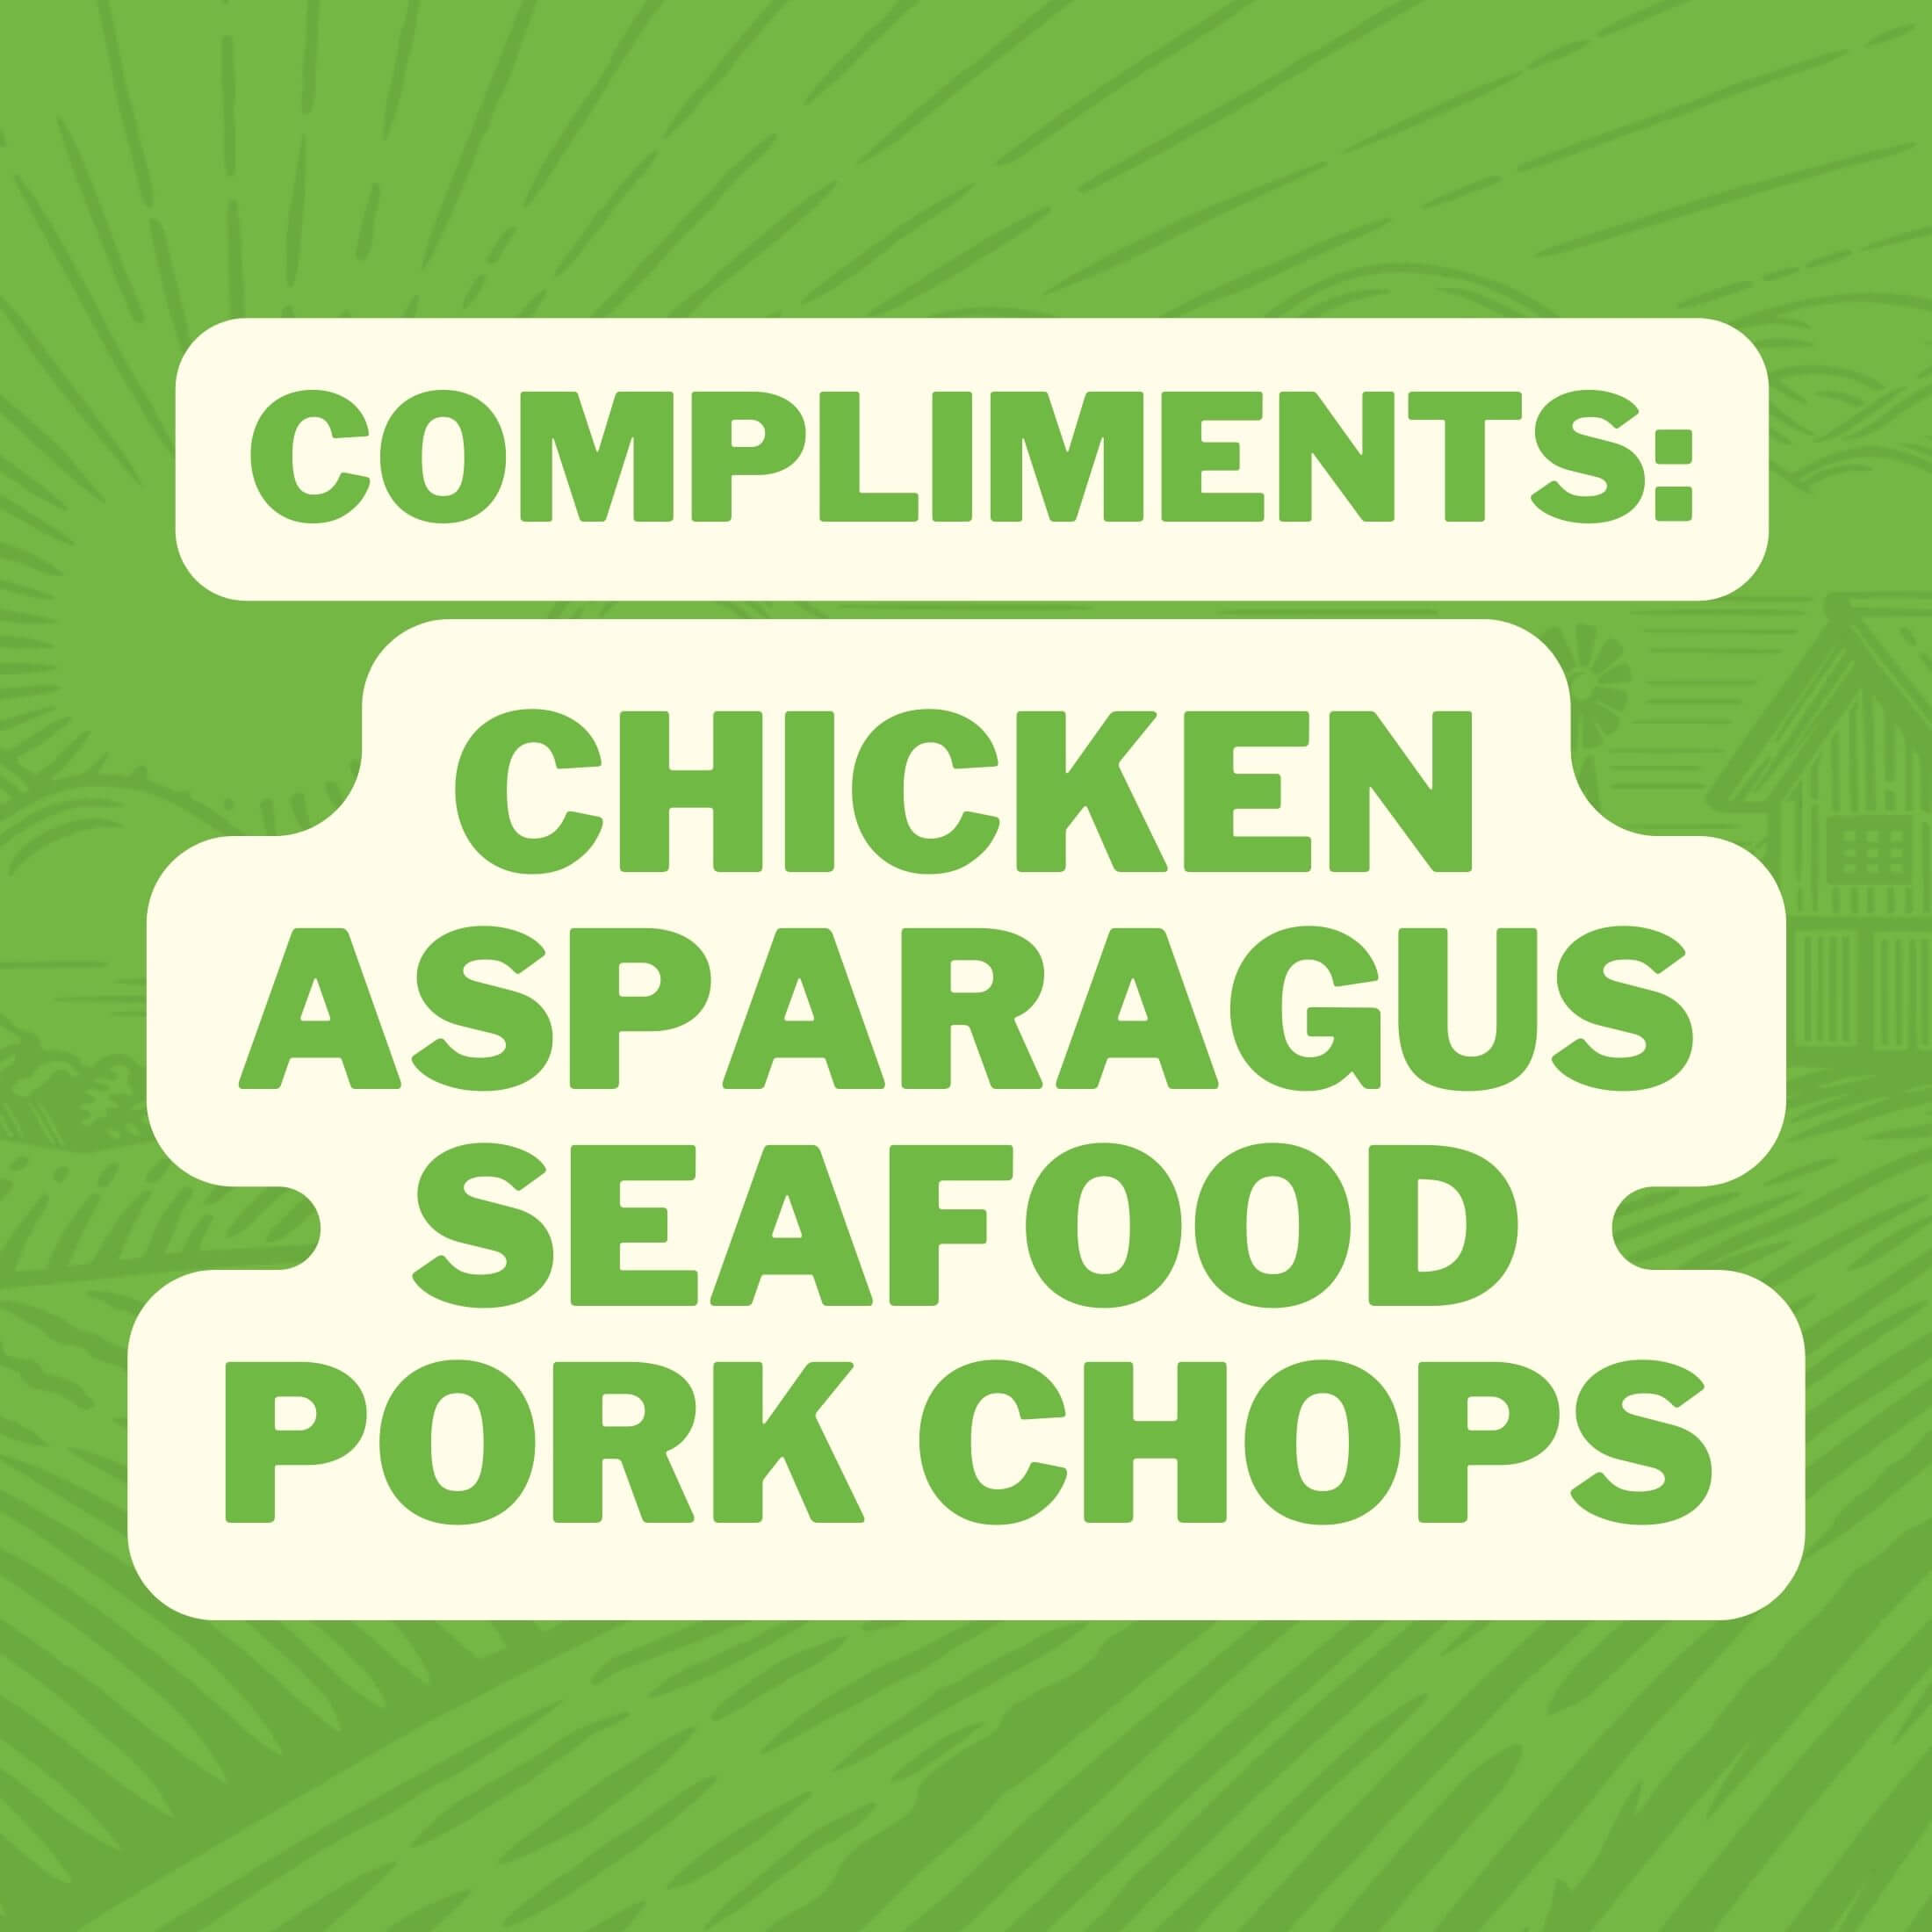 Compliments: Chicken Asparagus Seafood Pork Chops